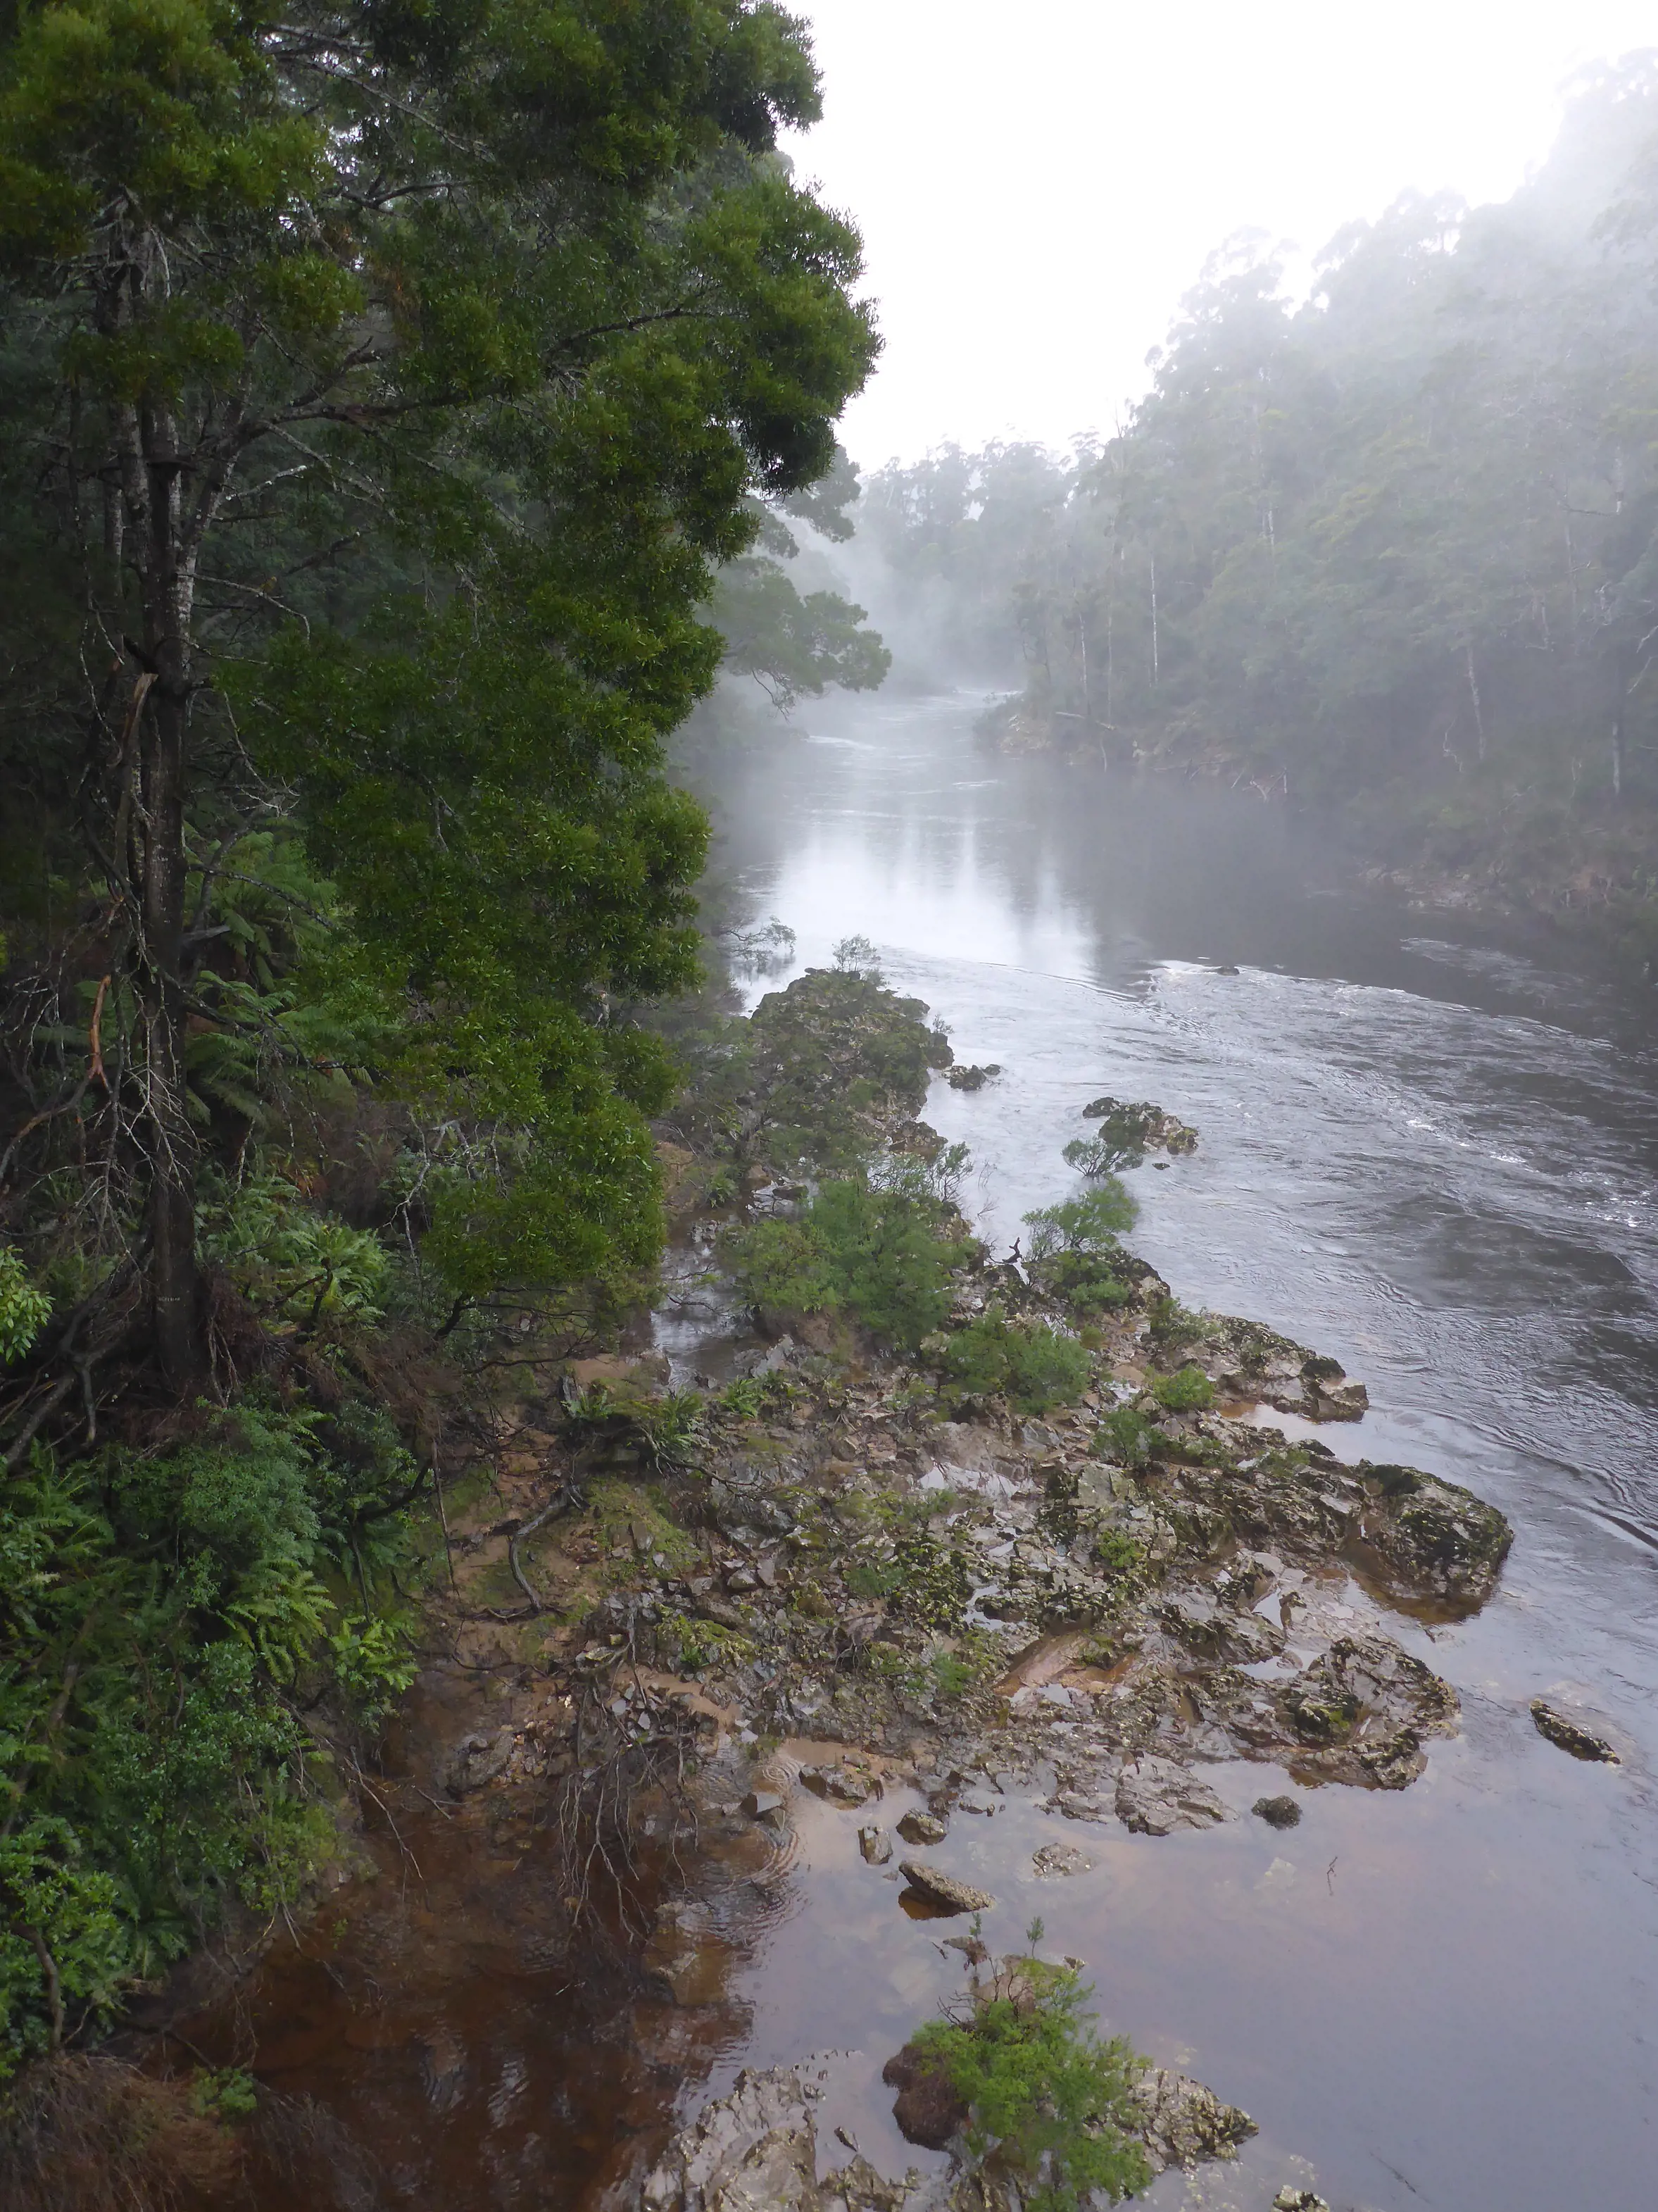 Image of Arthur River on a misty day with lush, green trees and rocks meeting the river.